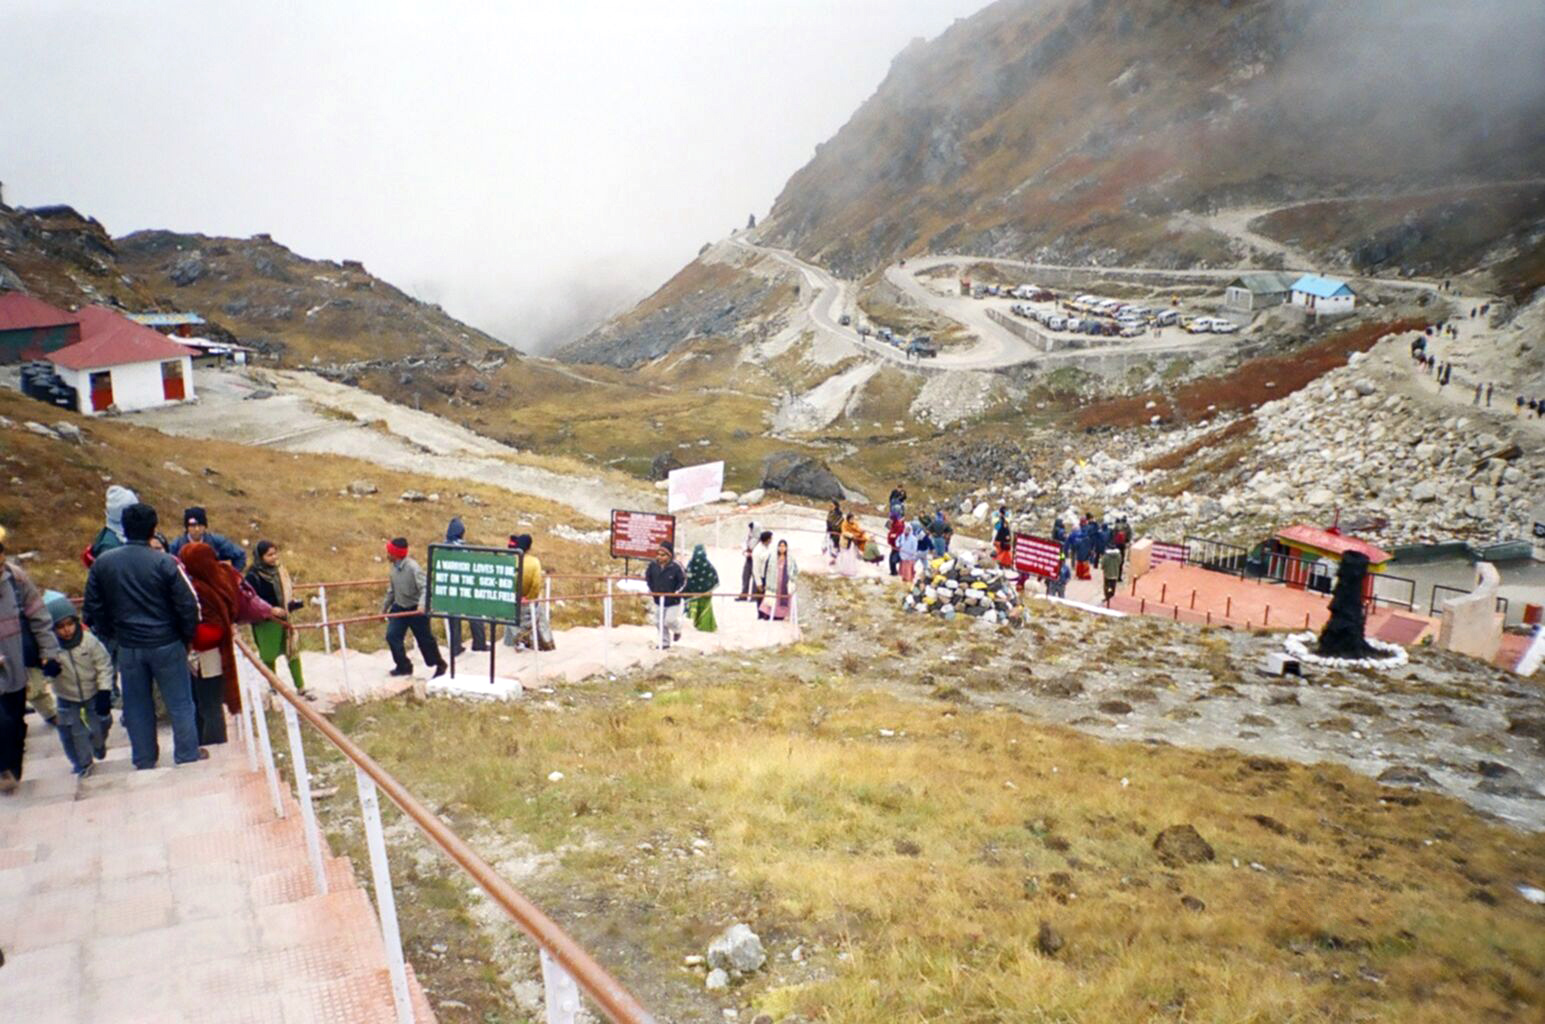 Ready for talks to reopen Nathu La pass, says China